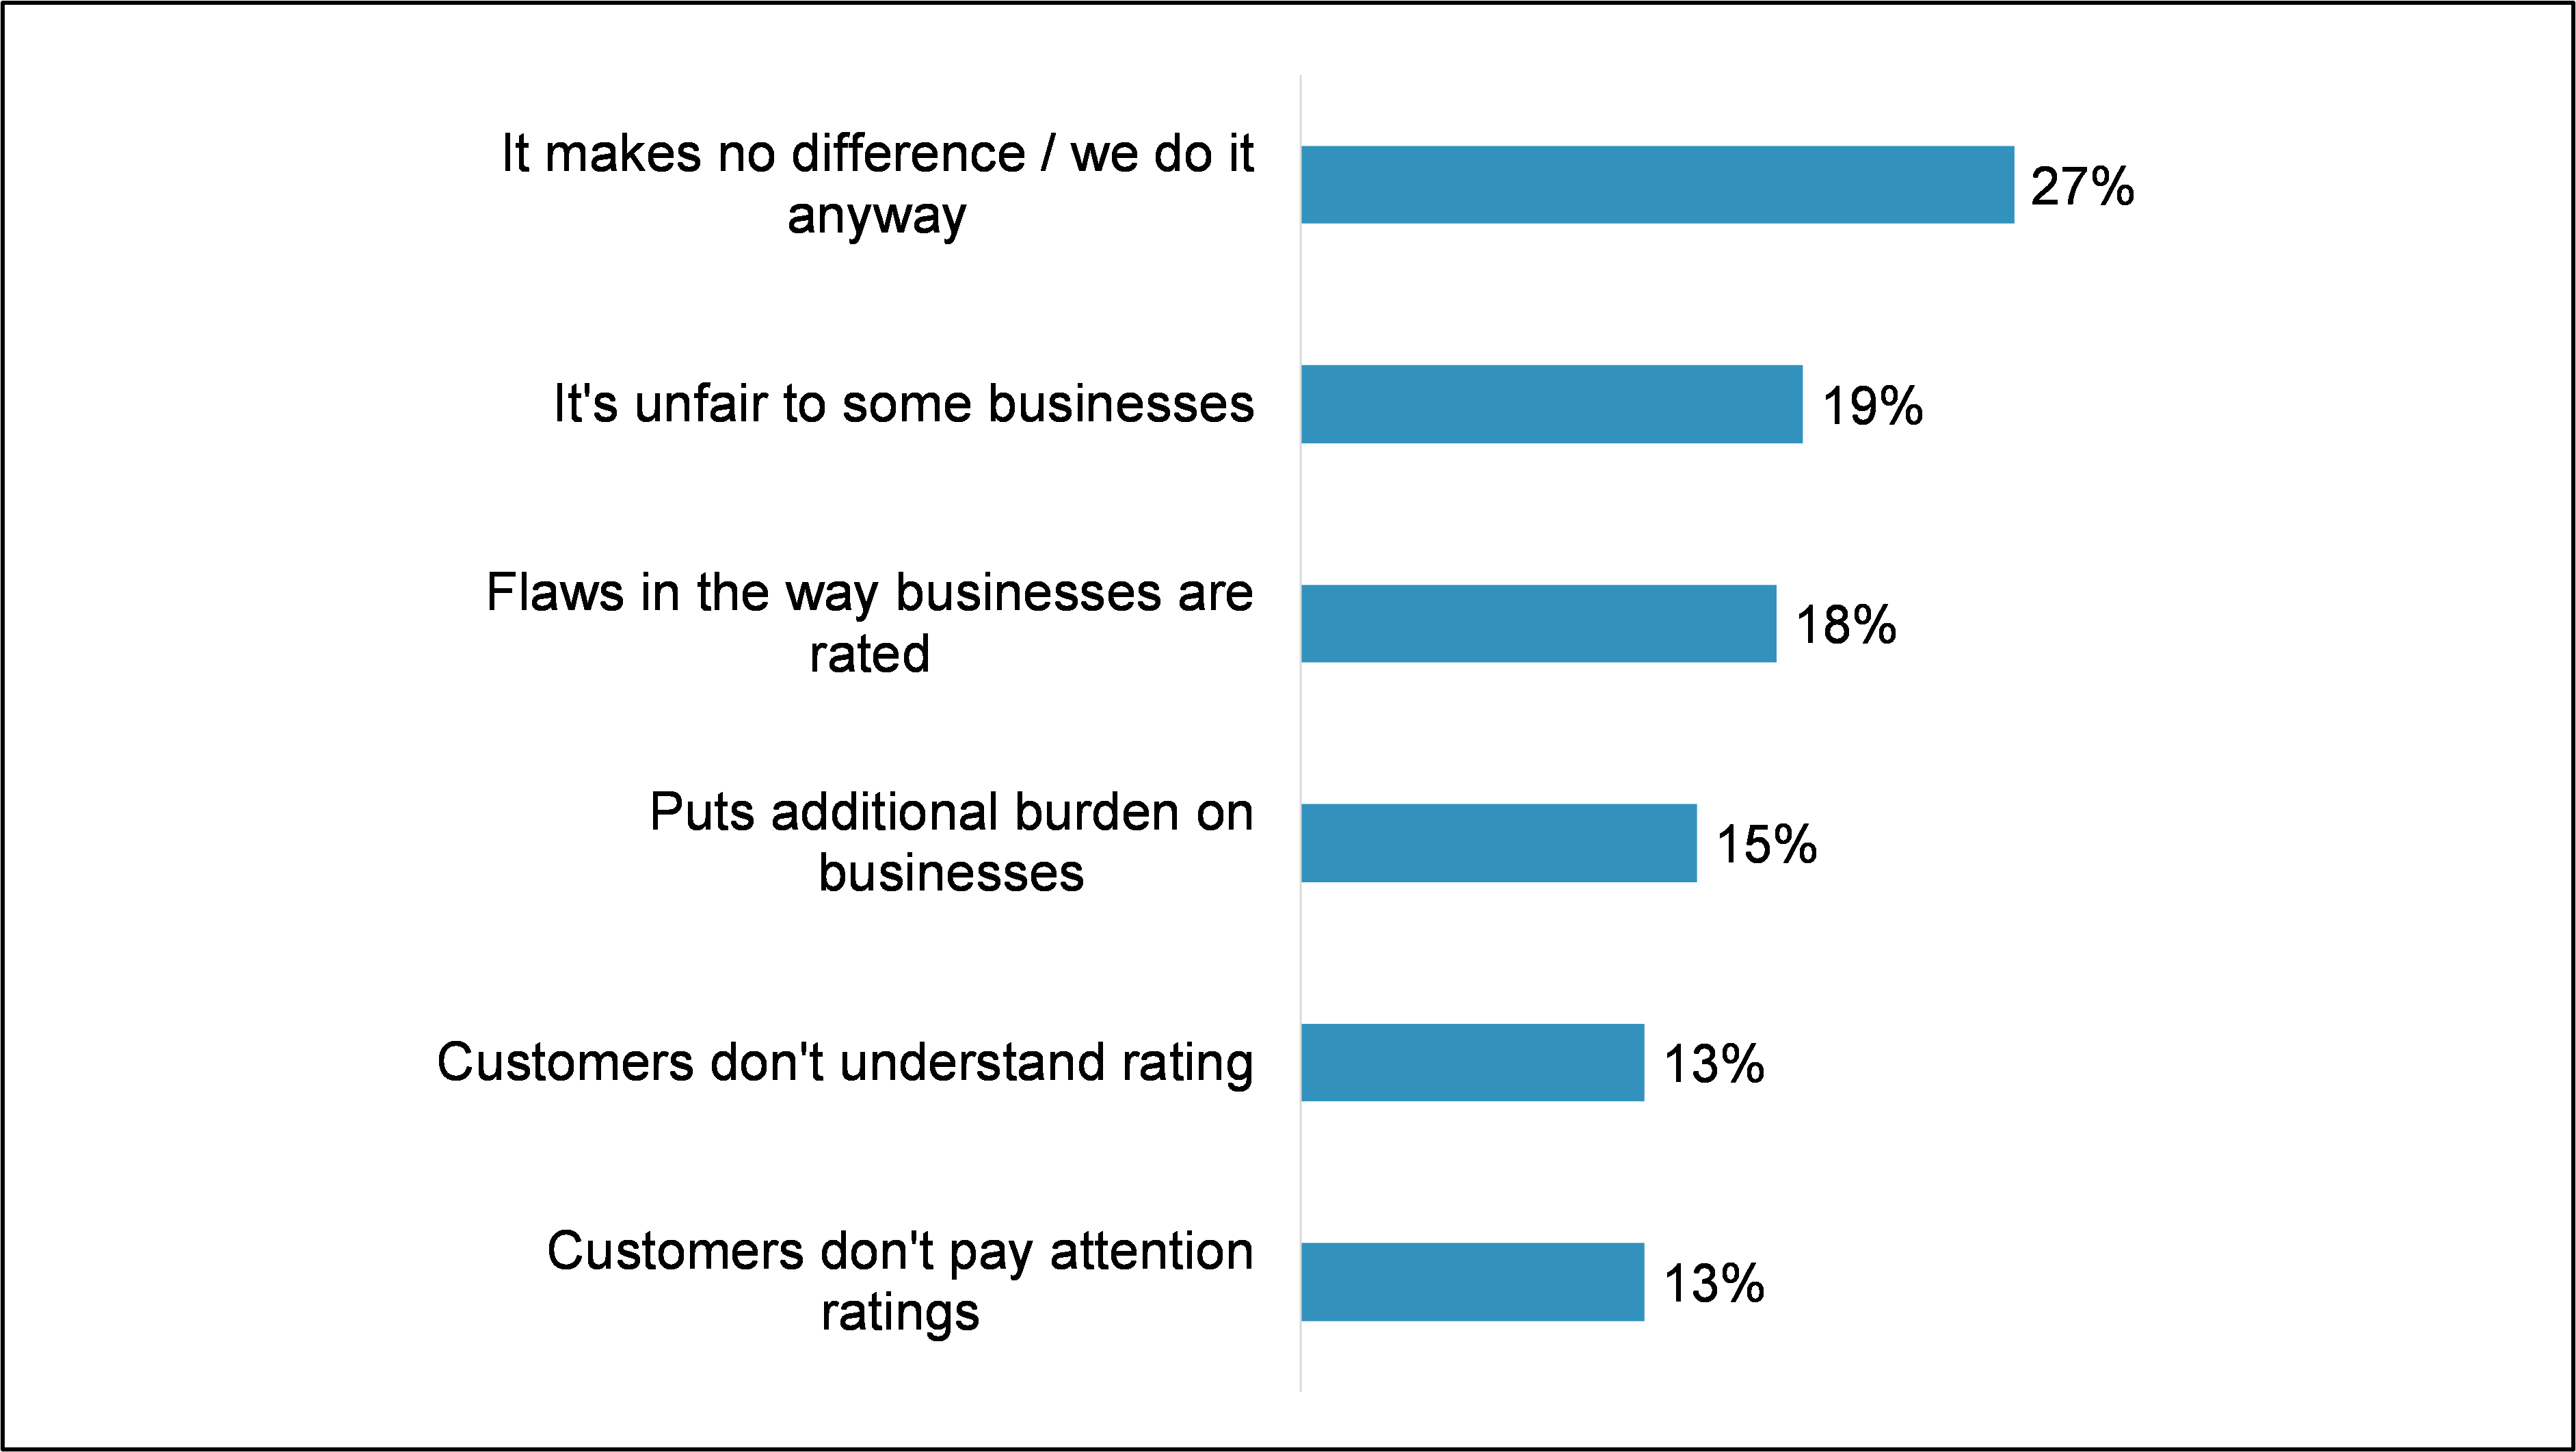 It makes no difference / we do it anyway 27%, It's unfair to some businesses 19%, Flaws in the way businesses are rated 18%, Puts additional burden on businesses 15%, Customers don't understand rating 13%, Customers don't pay attention ratings 13%.